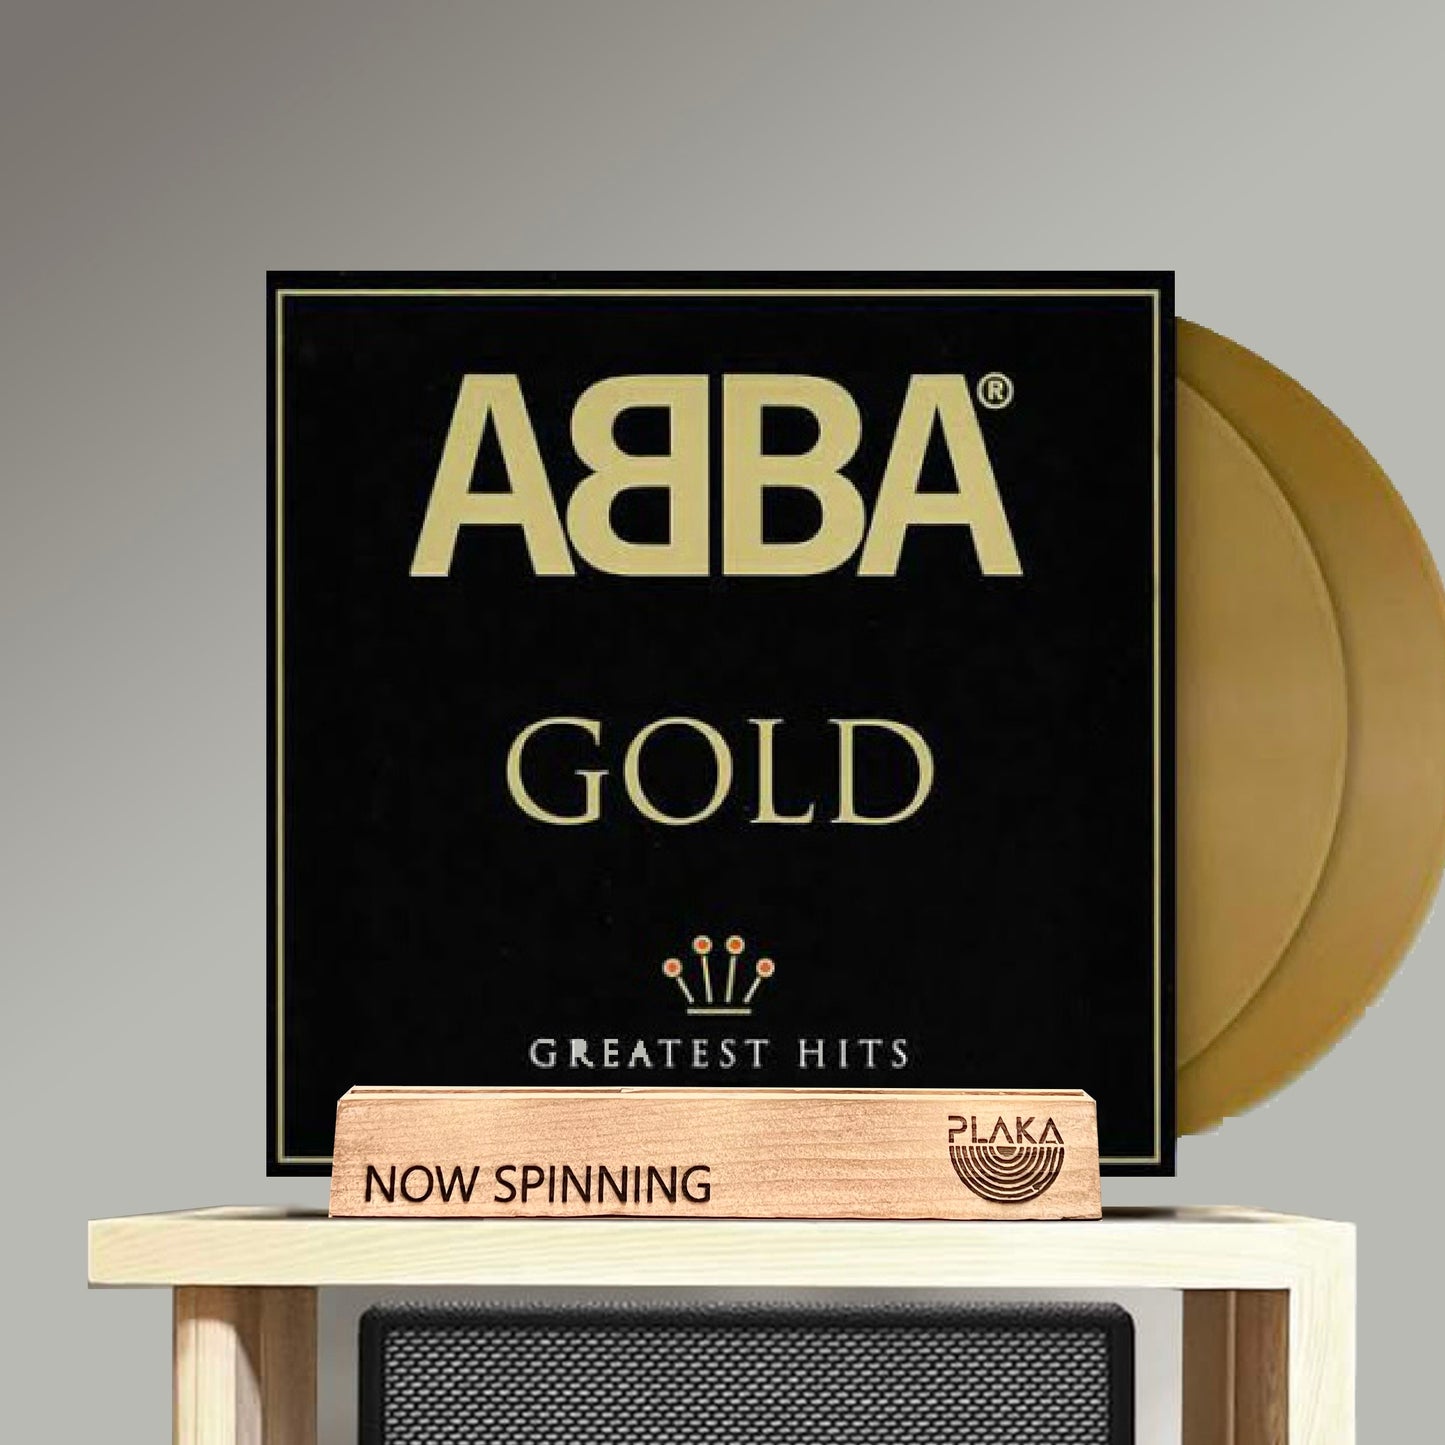 ABBA - GOLD Greatest Hits